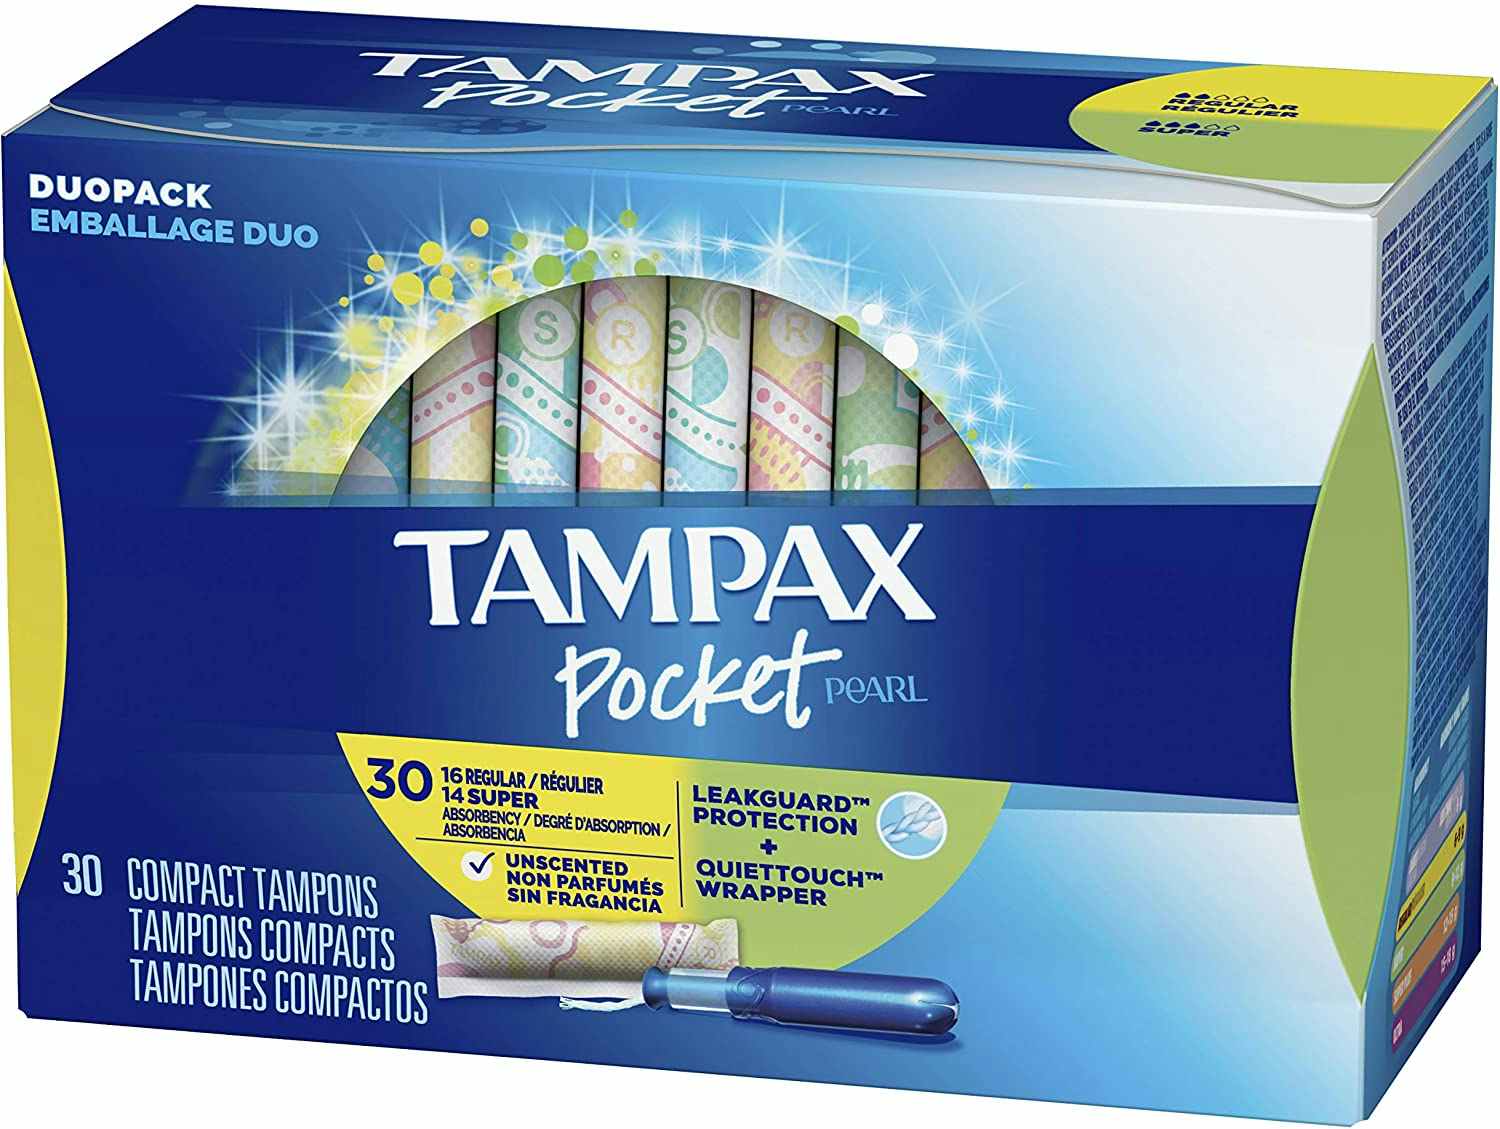 A duopack of Tampax pocket pearl tampons.